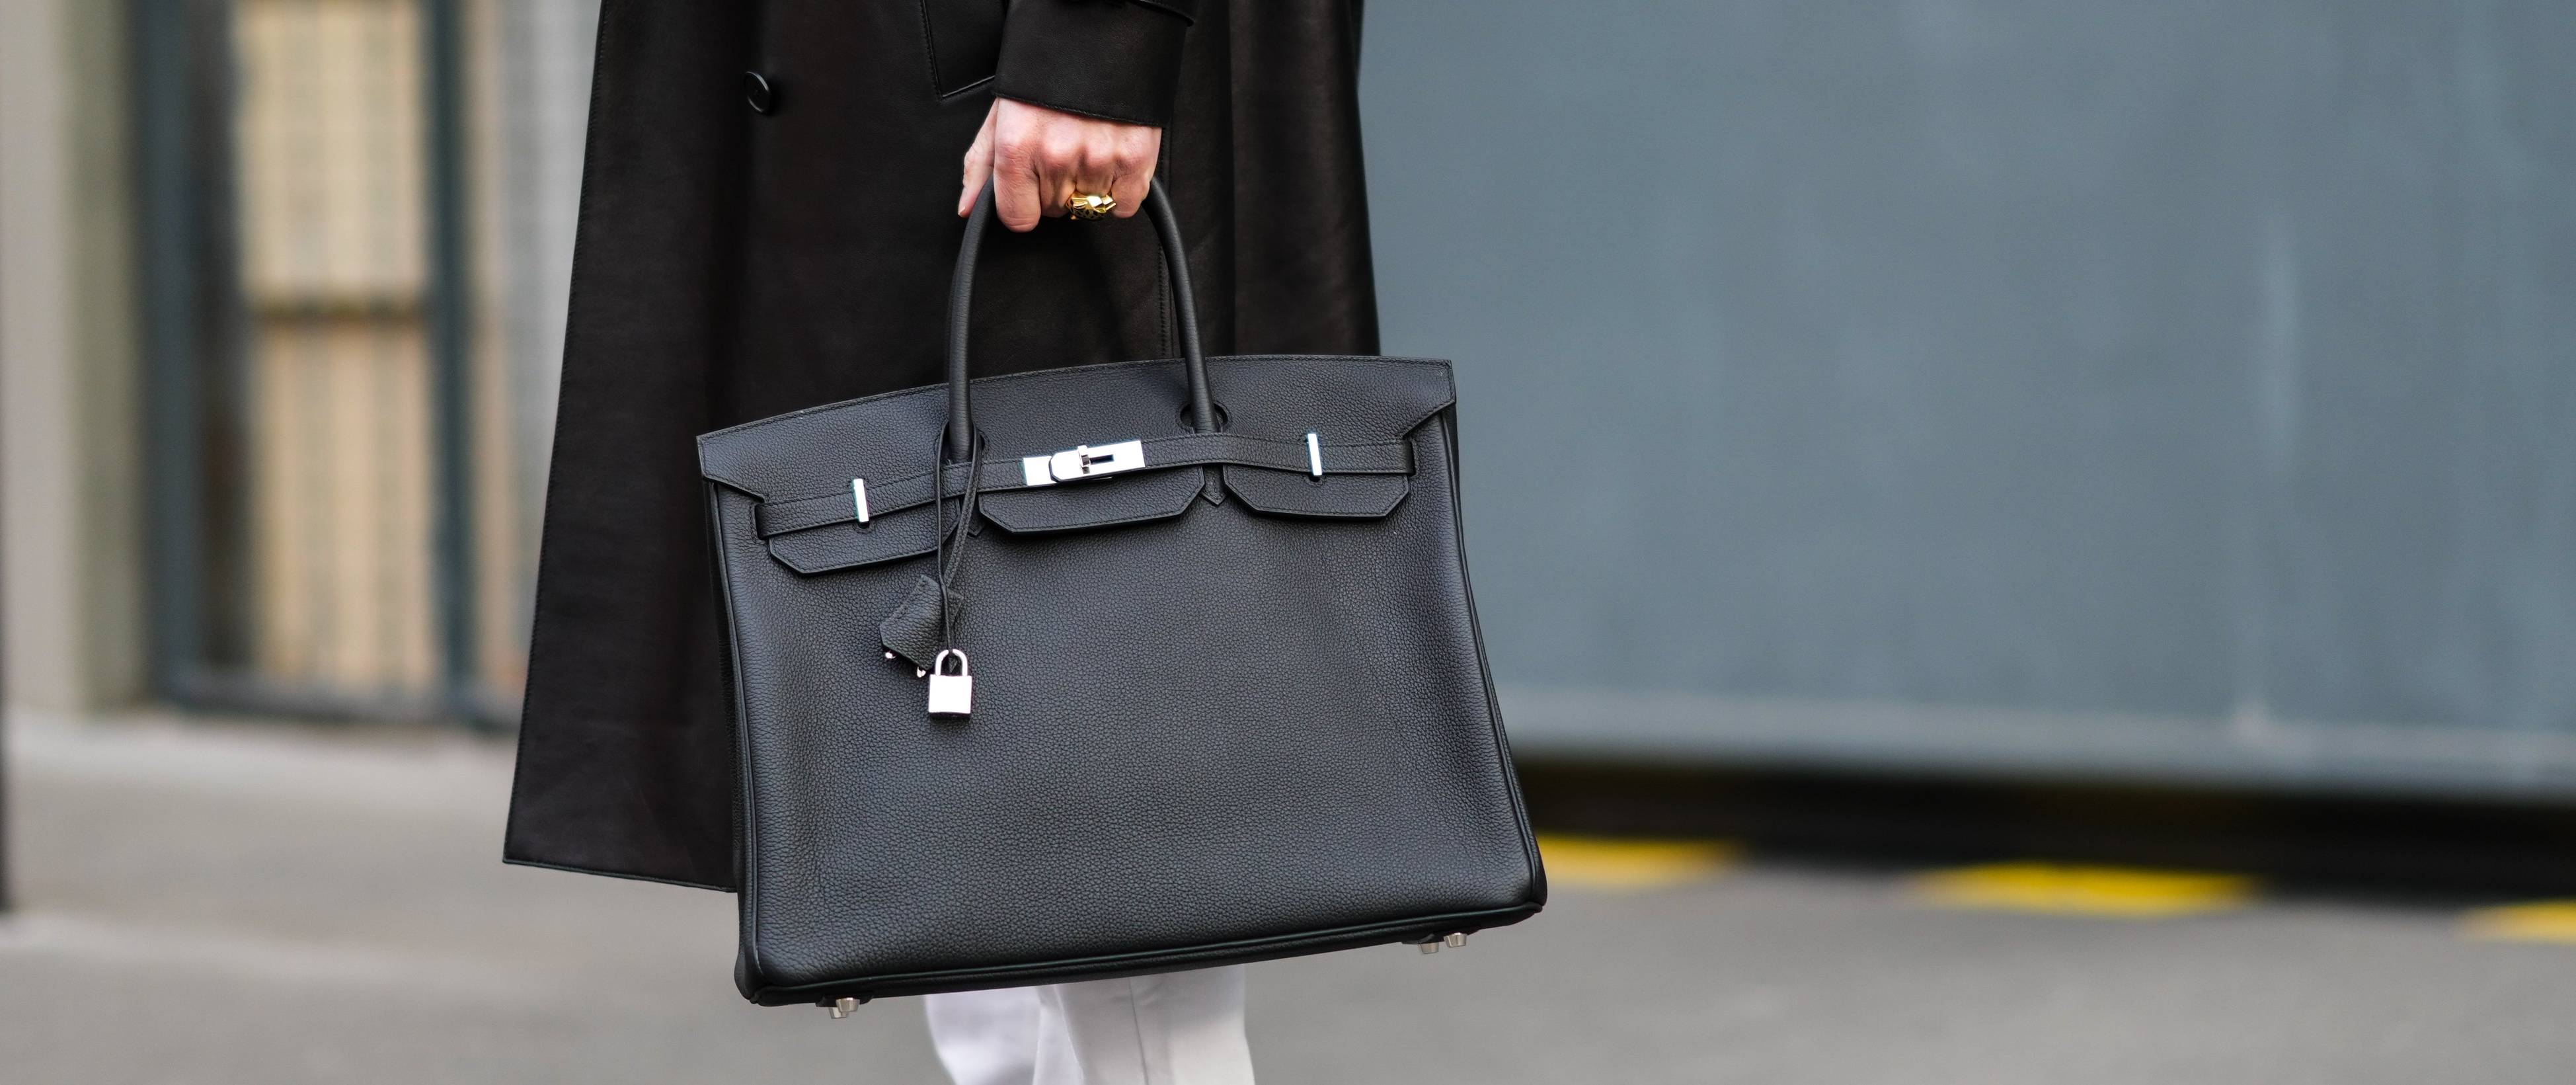 Luxury Men's Bags Are Selling Like Crazy